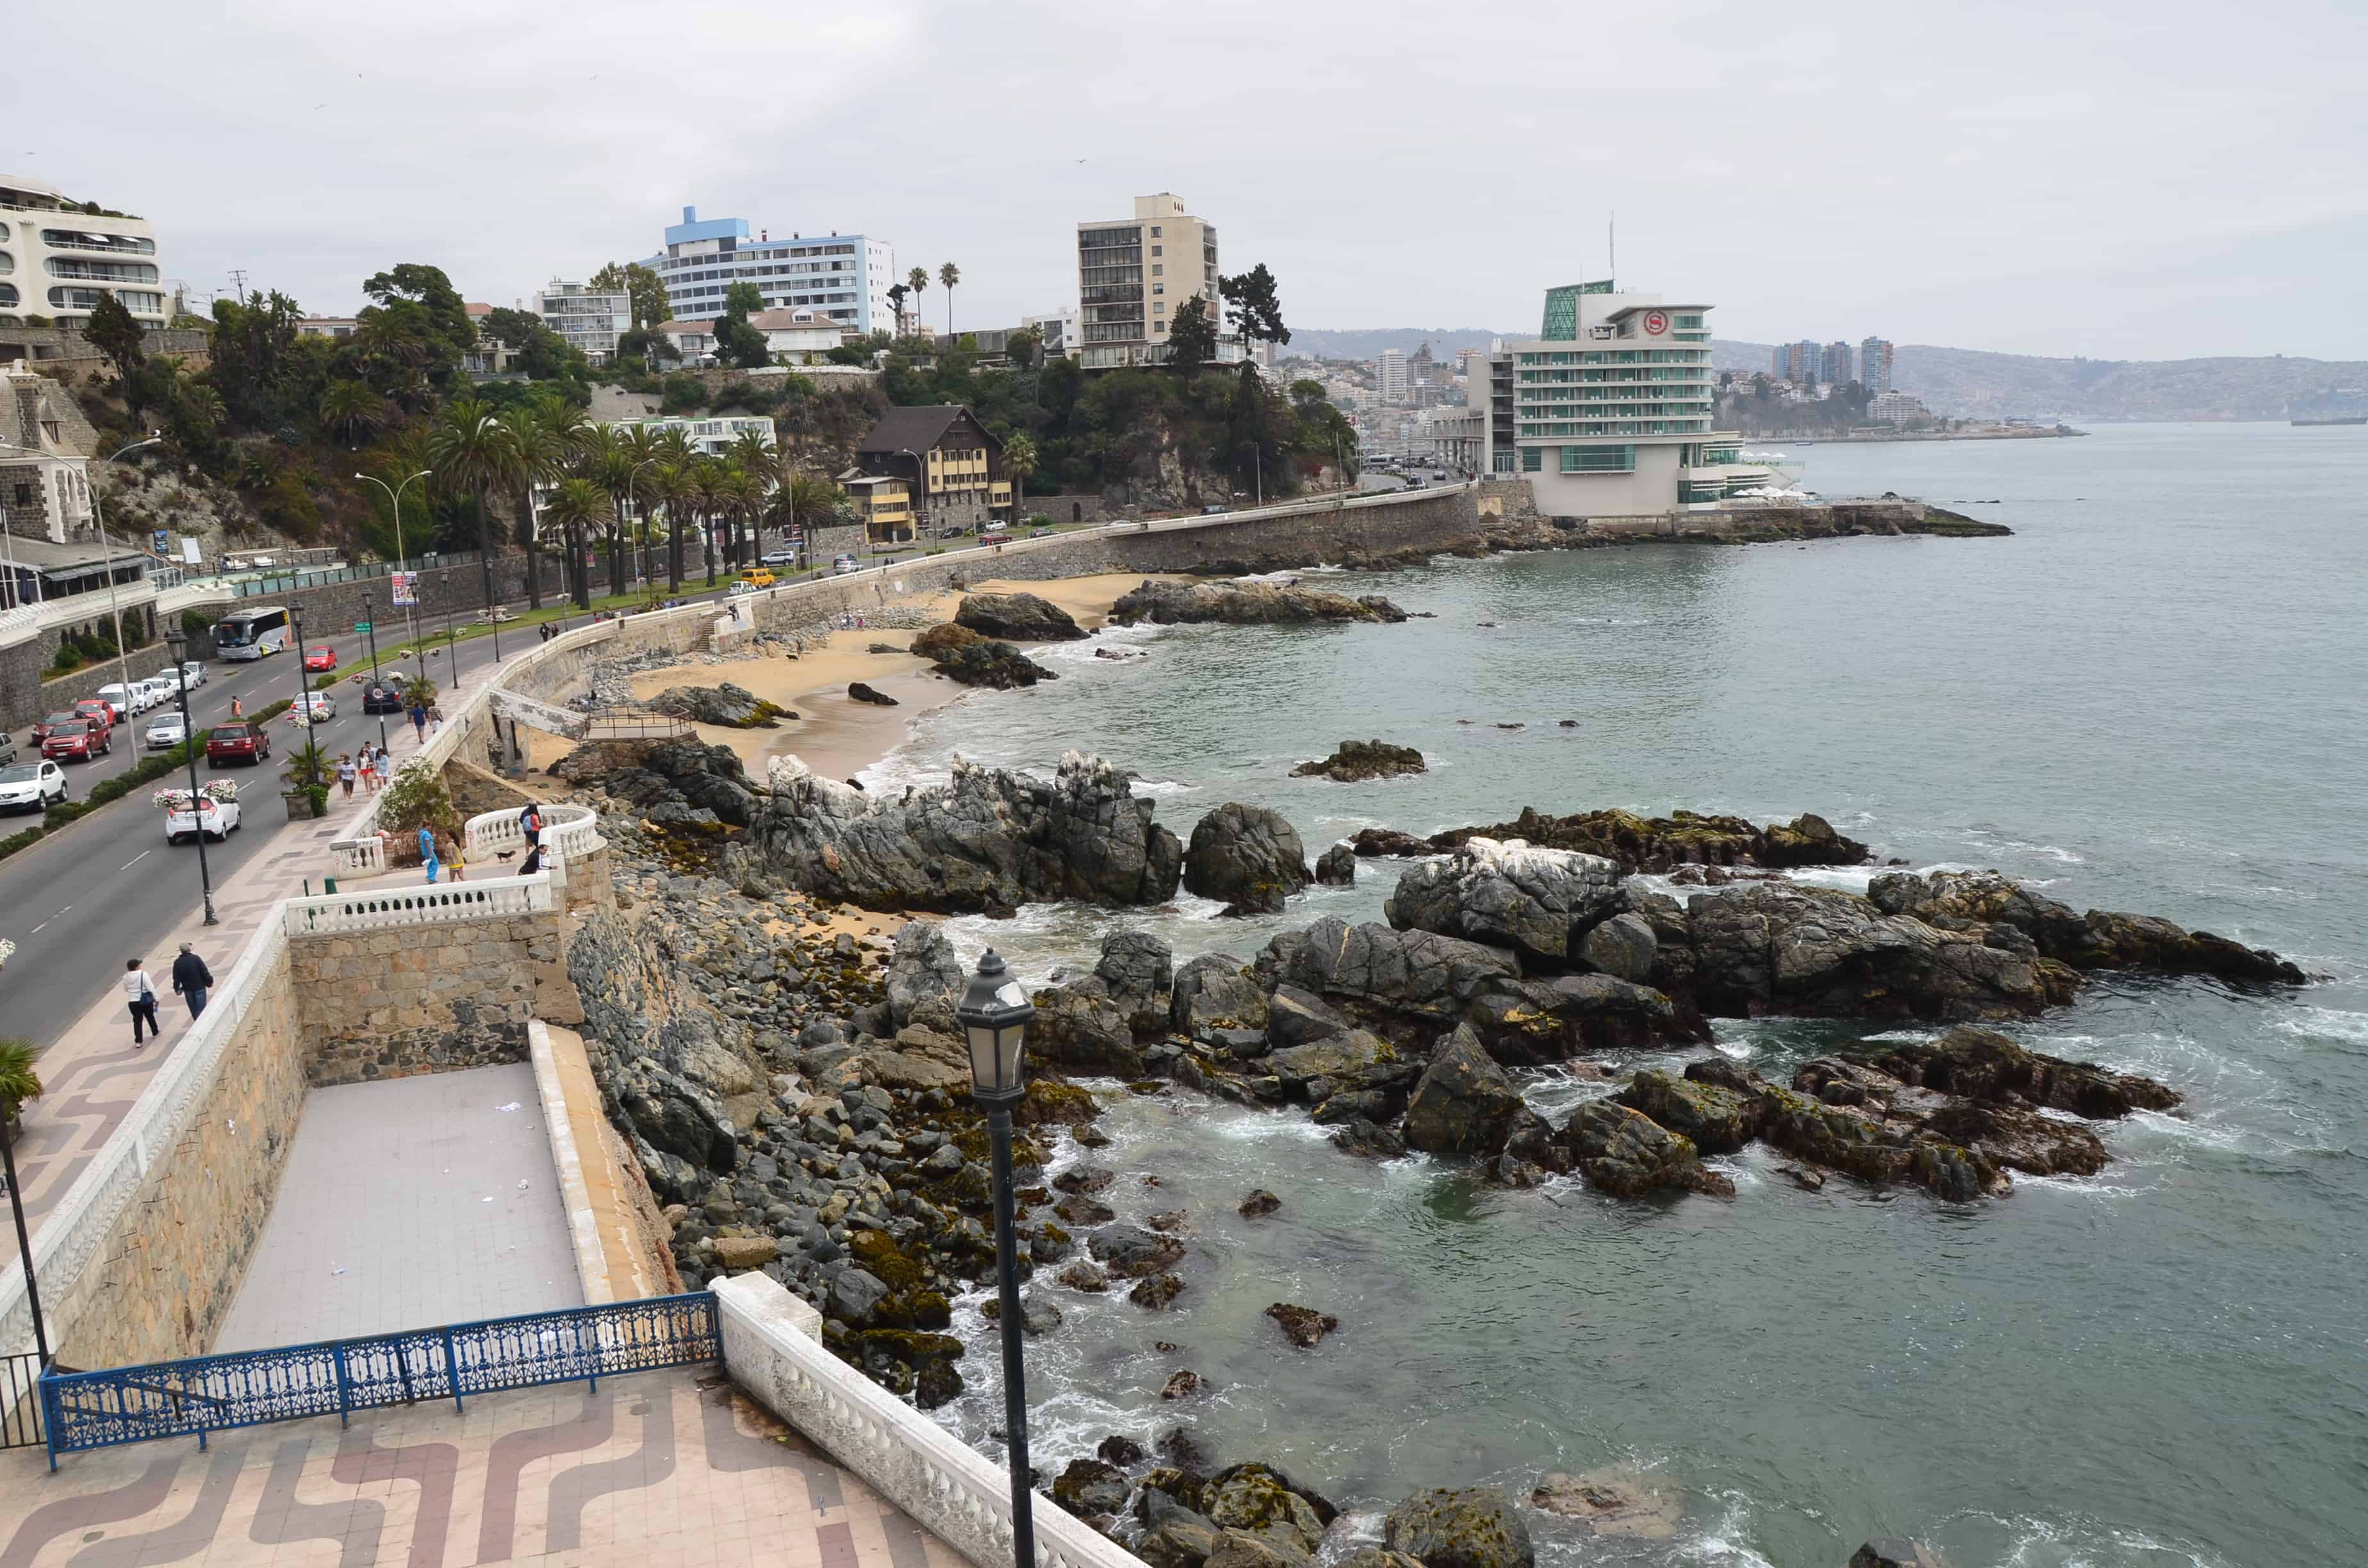 View from the lookout at Castillo Wulff in Viña del Mar, Chile